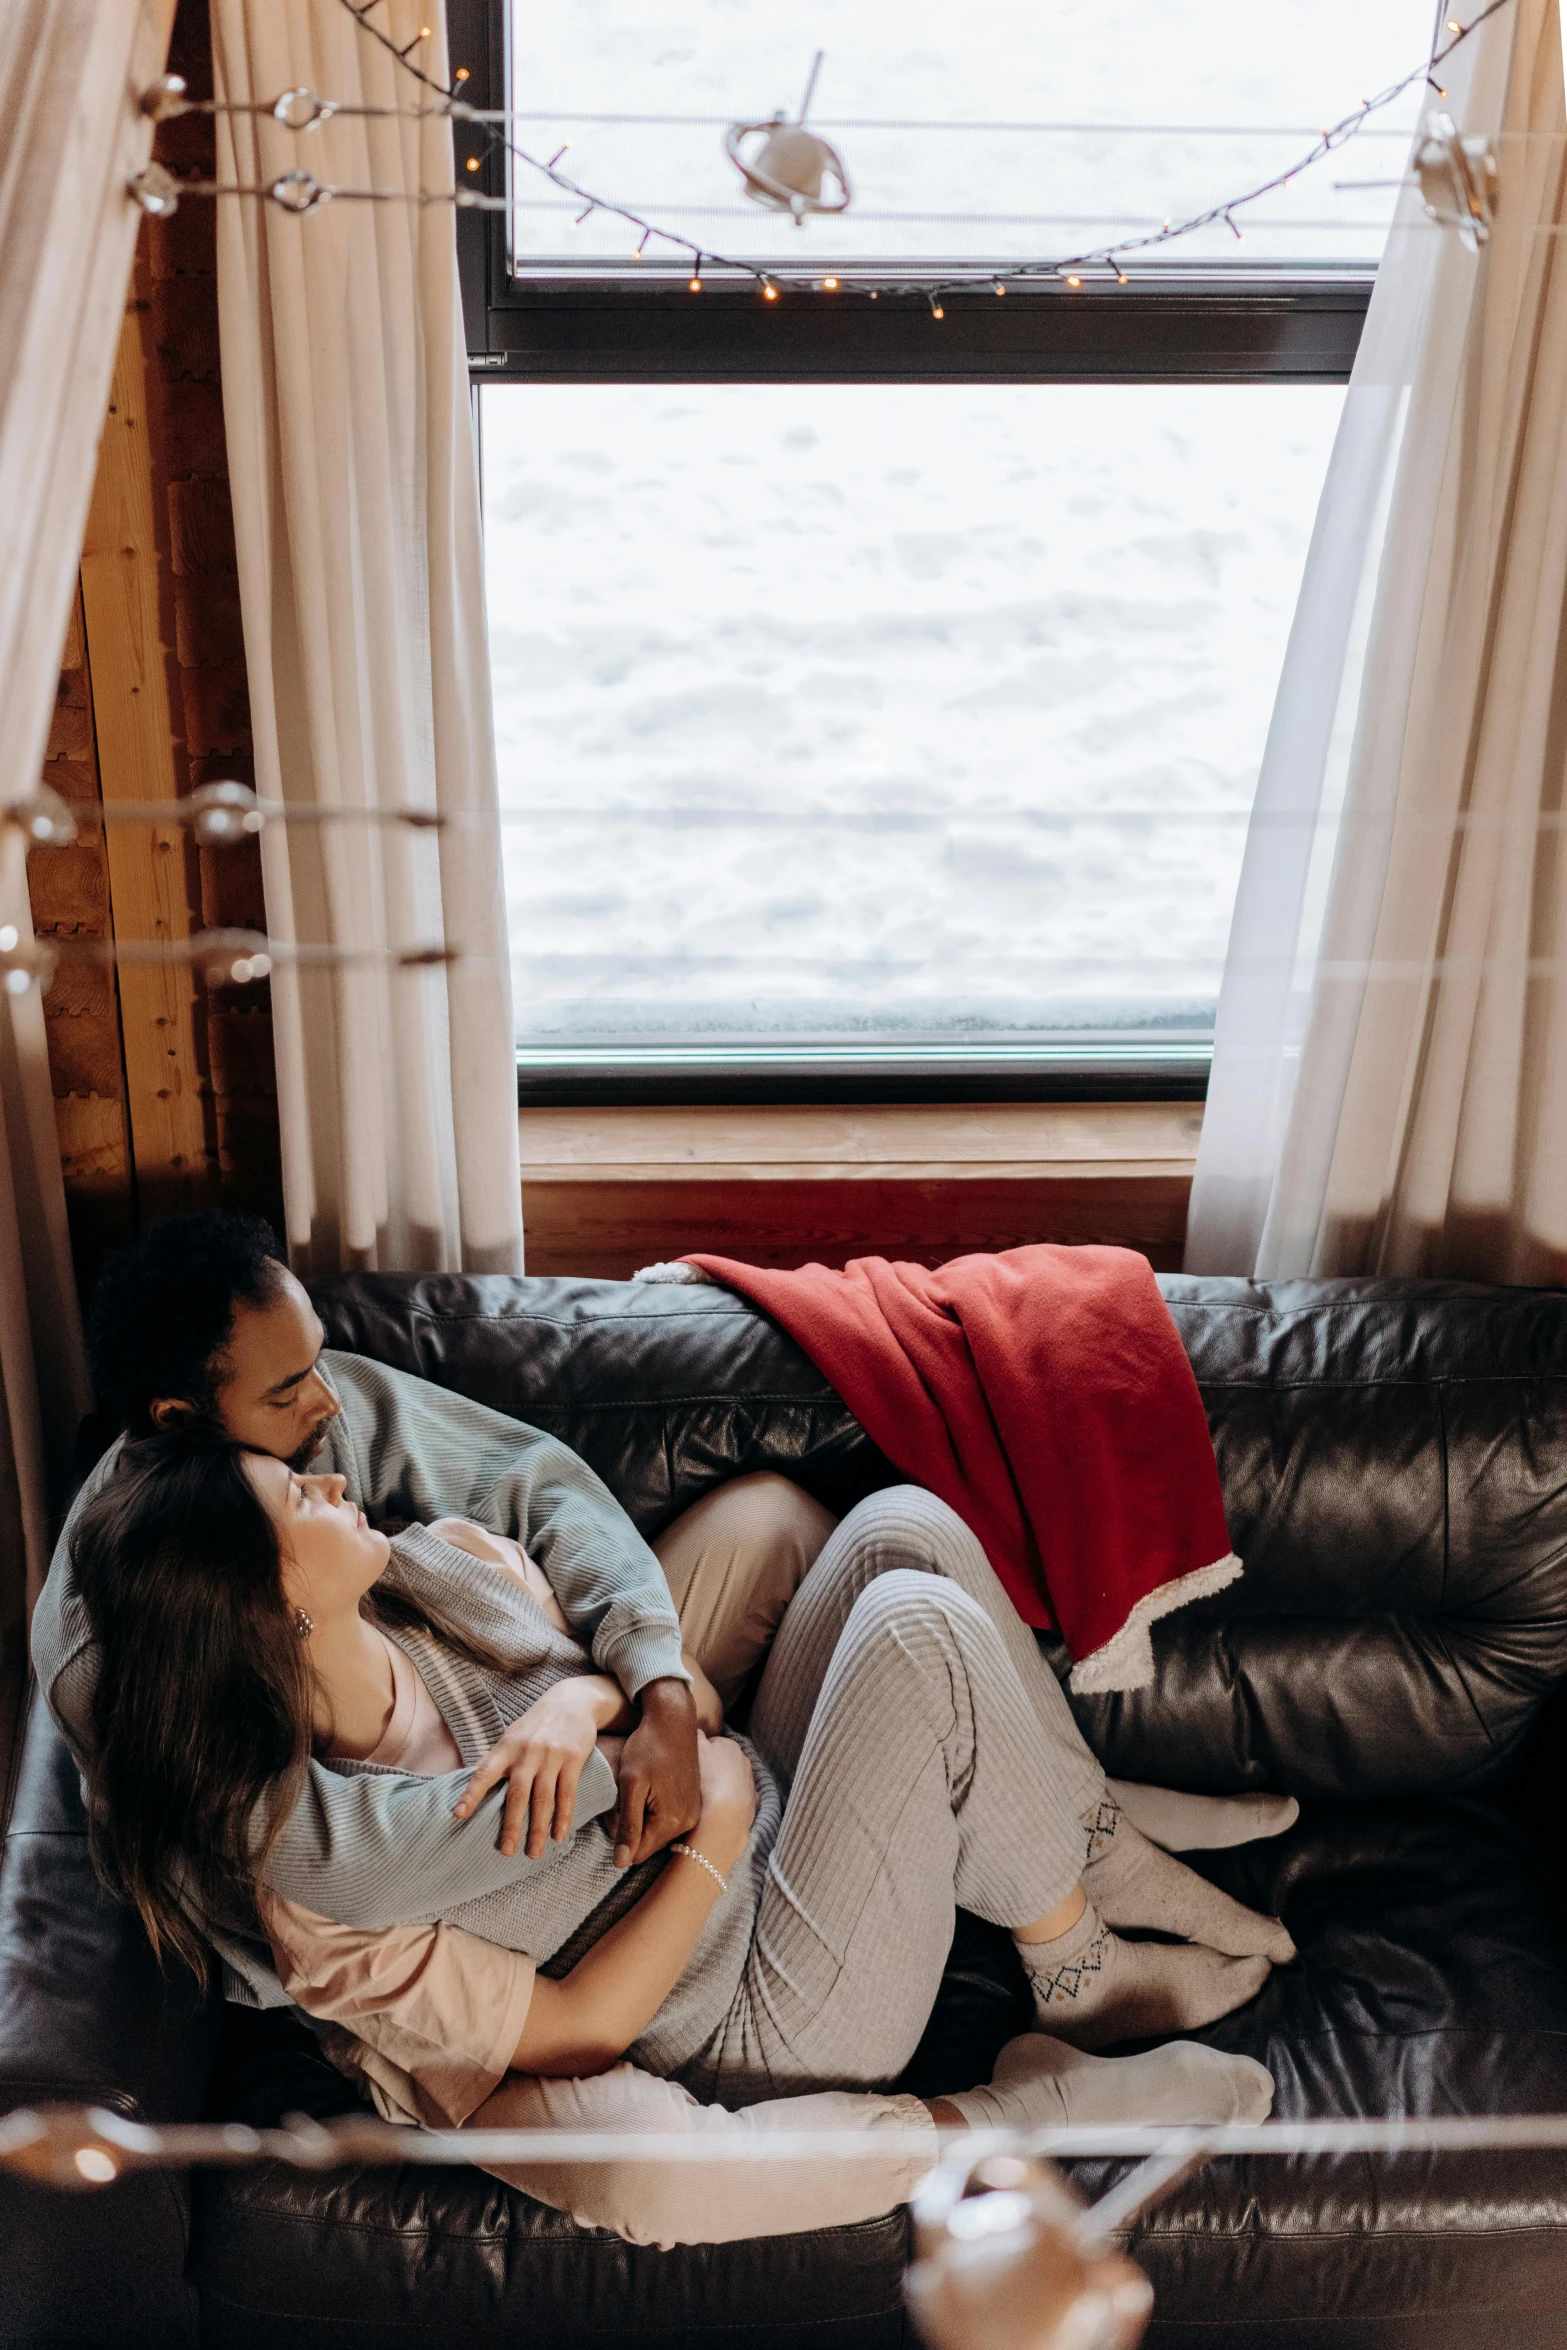 a man and woman sitting on a couch in front of a window, by Jan Tengnagel, pexels contest winner, ship interior, lake house, cuddling, holiday vibe